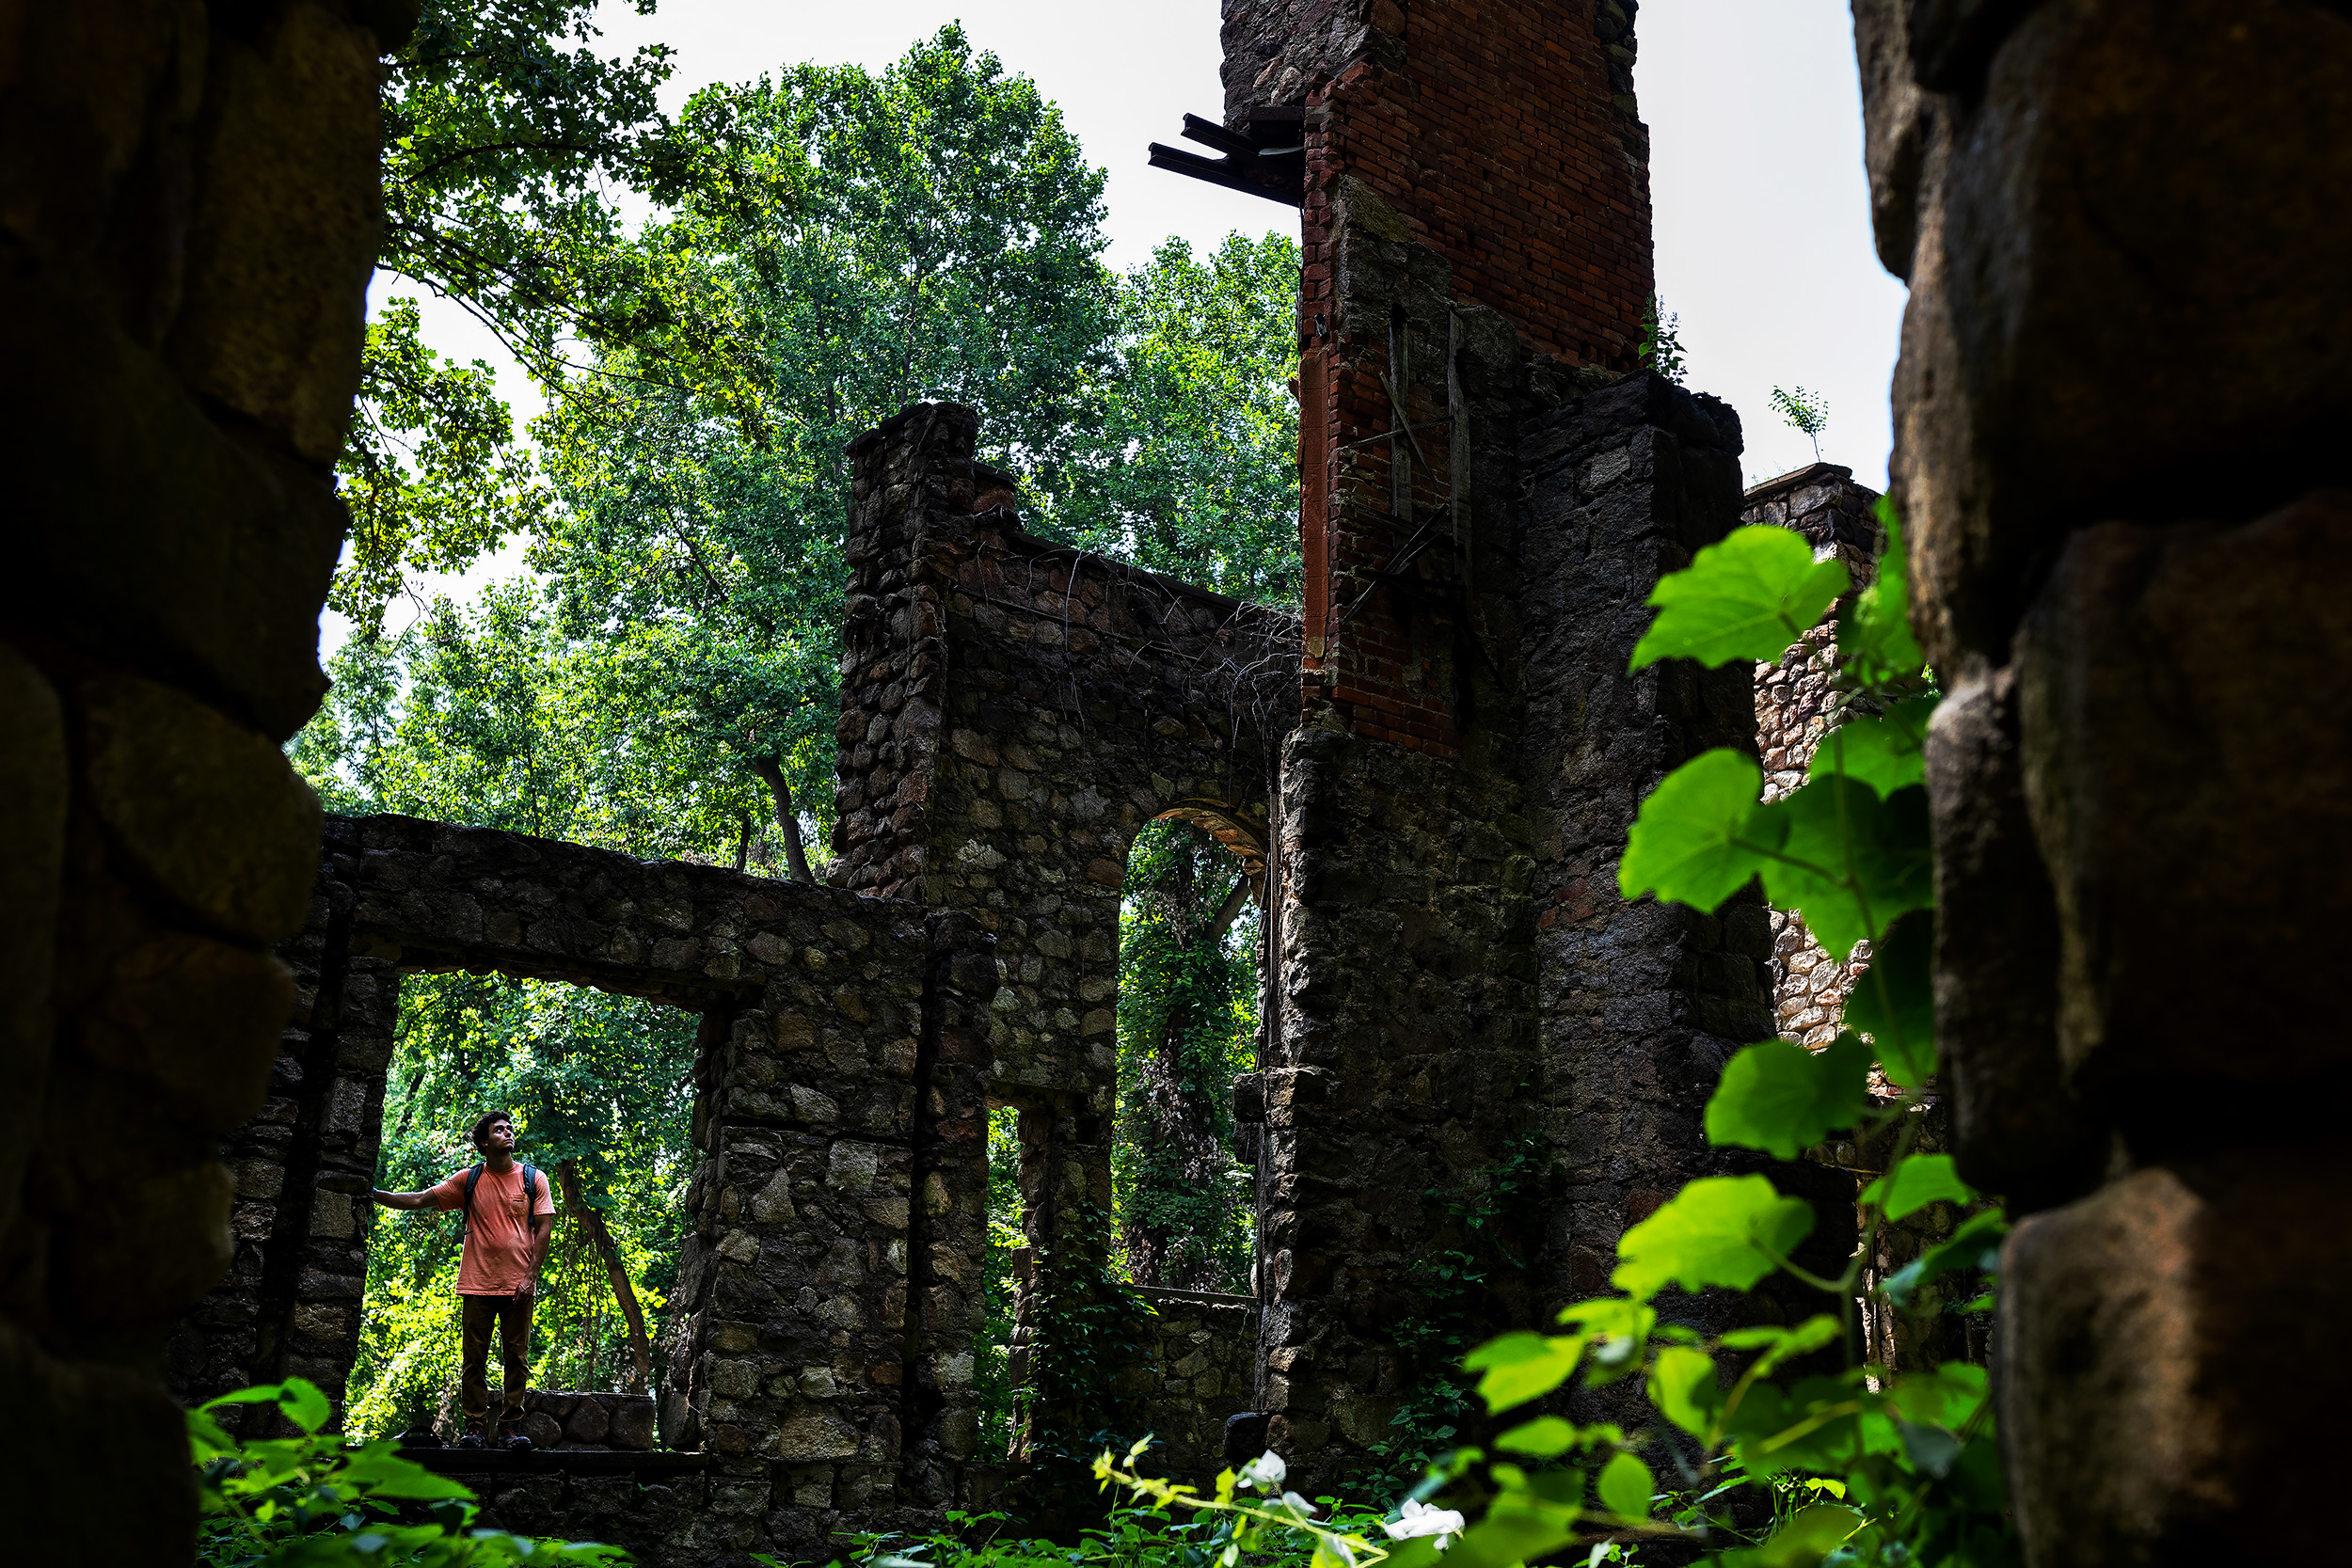  A visitor tours the old ruins of the Cornish Estate in Cold Spring, New York. In 1958, a fire destroyed most of the mansion leaving the Cornish’s grand estate in ruins. Today those ruins are overgrown and gradually have been reclaimed by the forest.